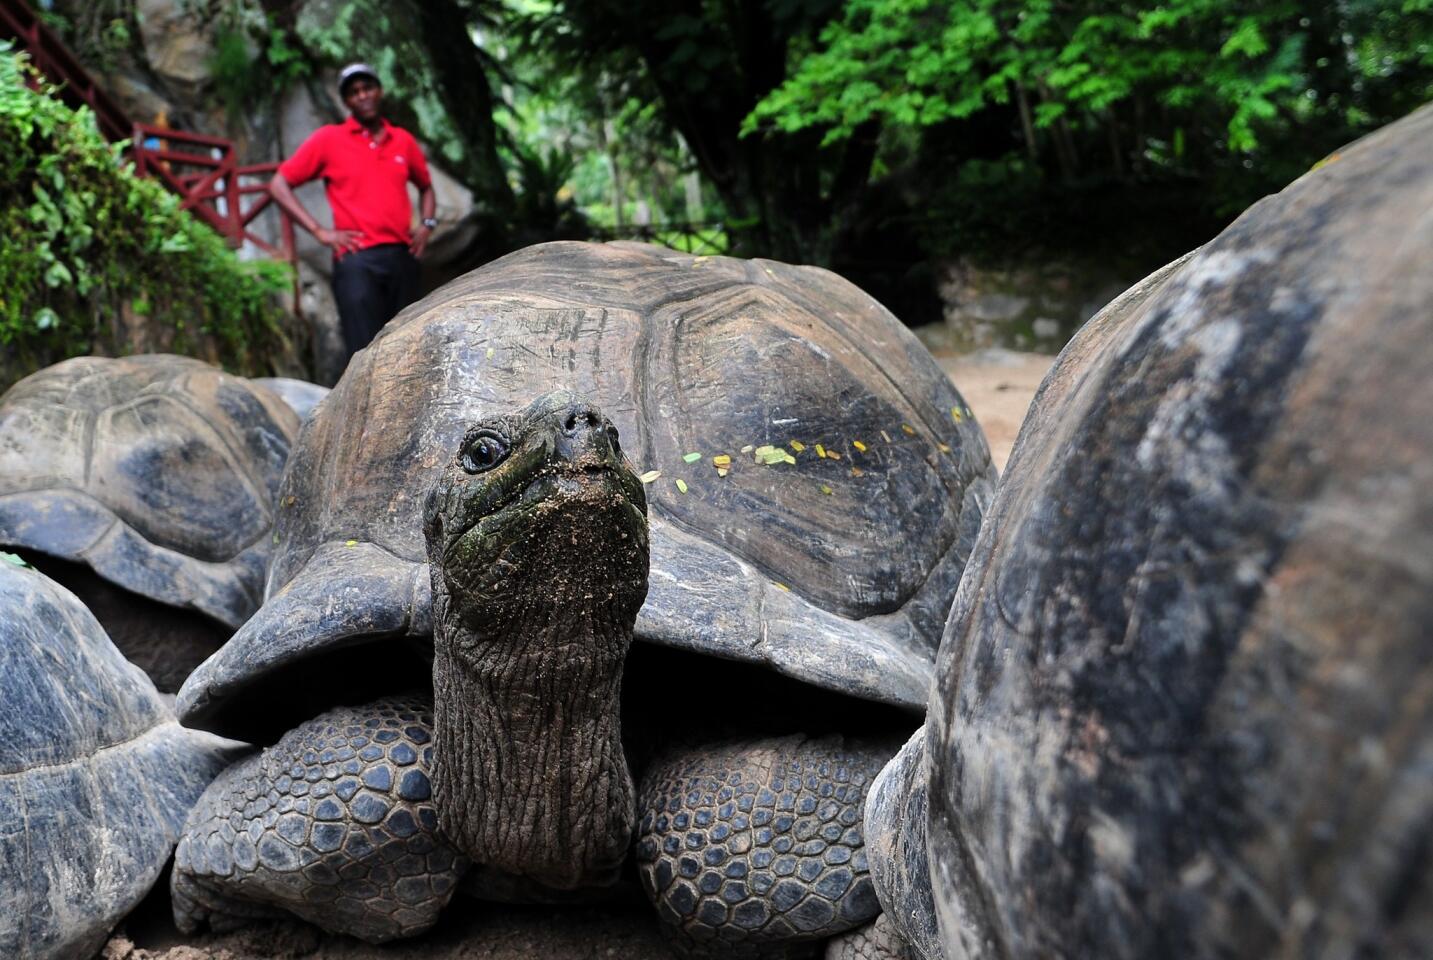 Turtles and tortoises are believed to have existed for about 210 million years, making them among of the oldest organisms on Earth. An Aldabra giant tortoise is shown here.